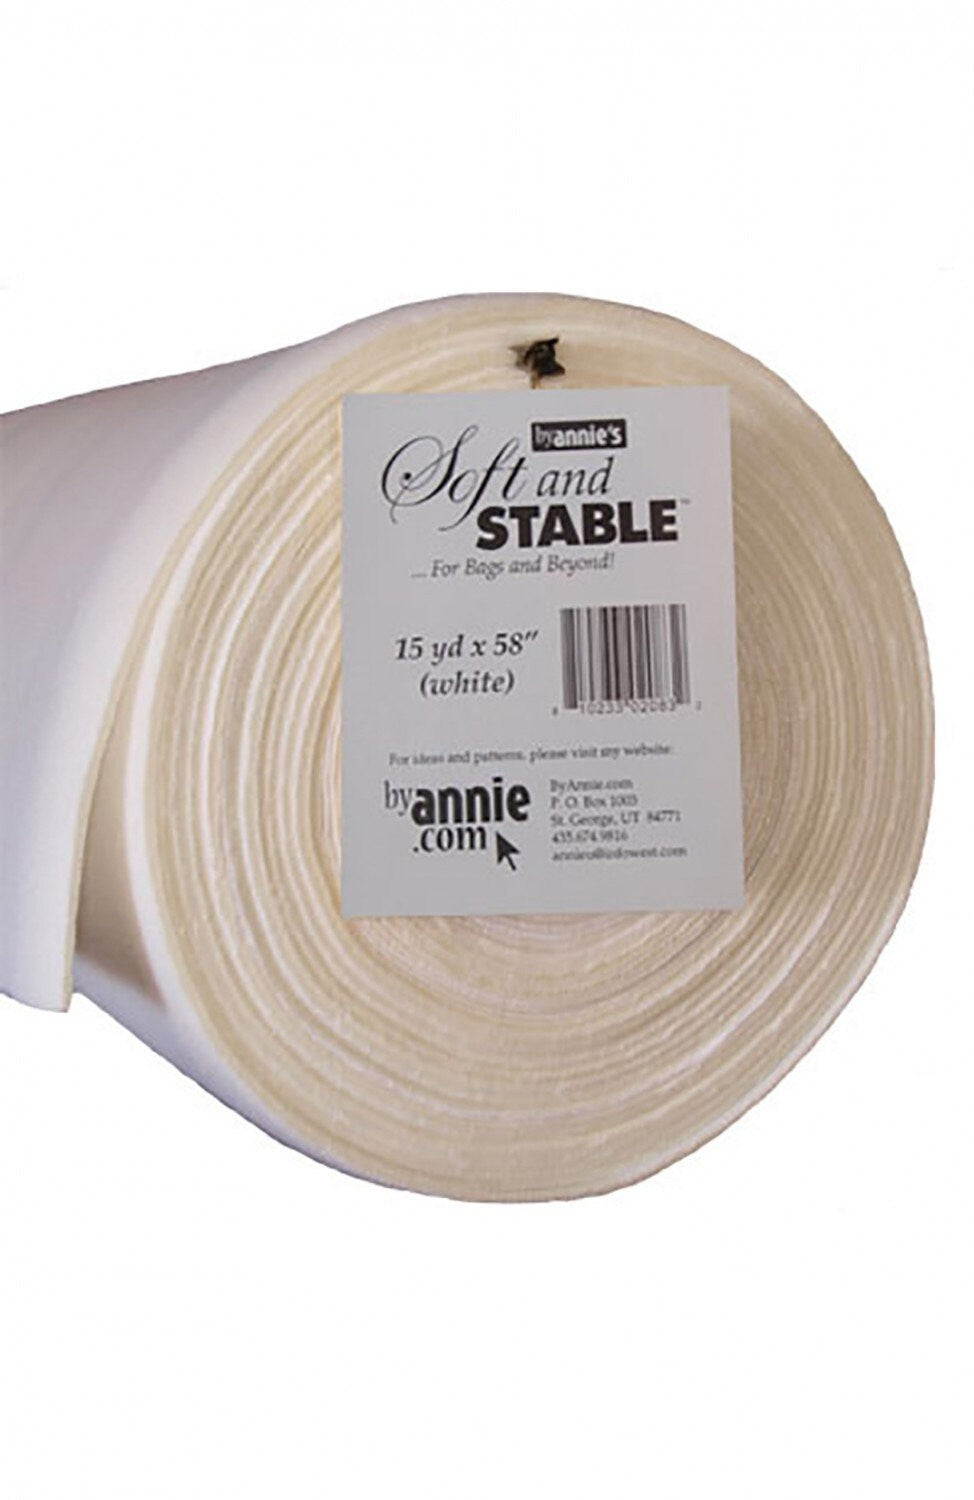 Soft and Stable Foam Stabilizer 36x58 for Bags and Beyond by Annie's White  Ready to Ship 